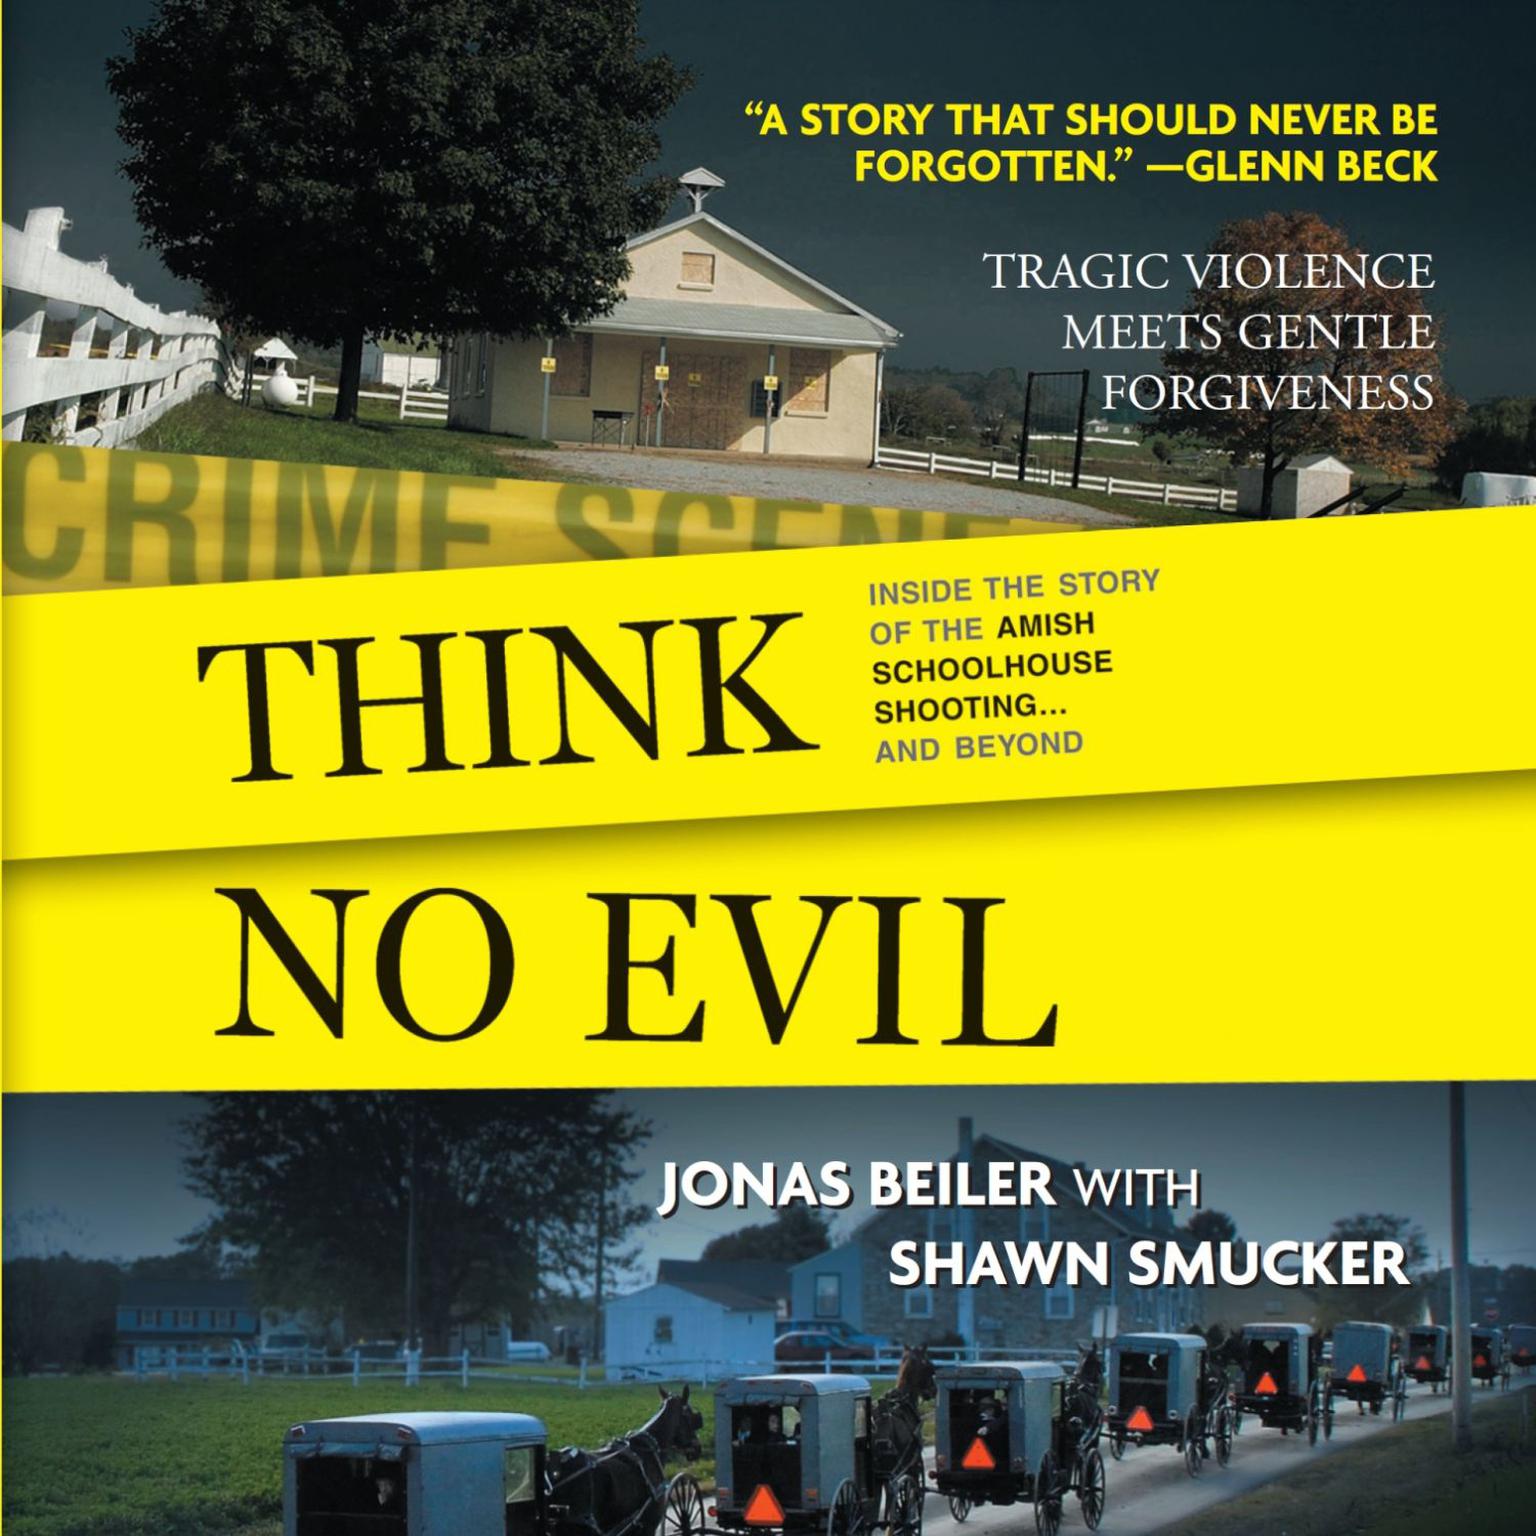 Think No Evil: Inside the Story of the Amish Schoolhouse Shooting...and Beyond Audiobook, by Jonas Beiler